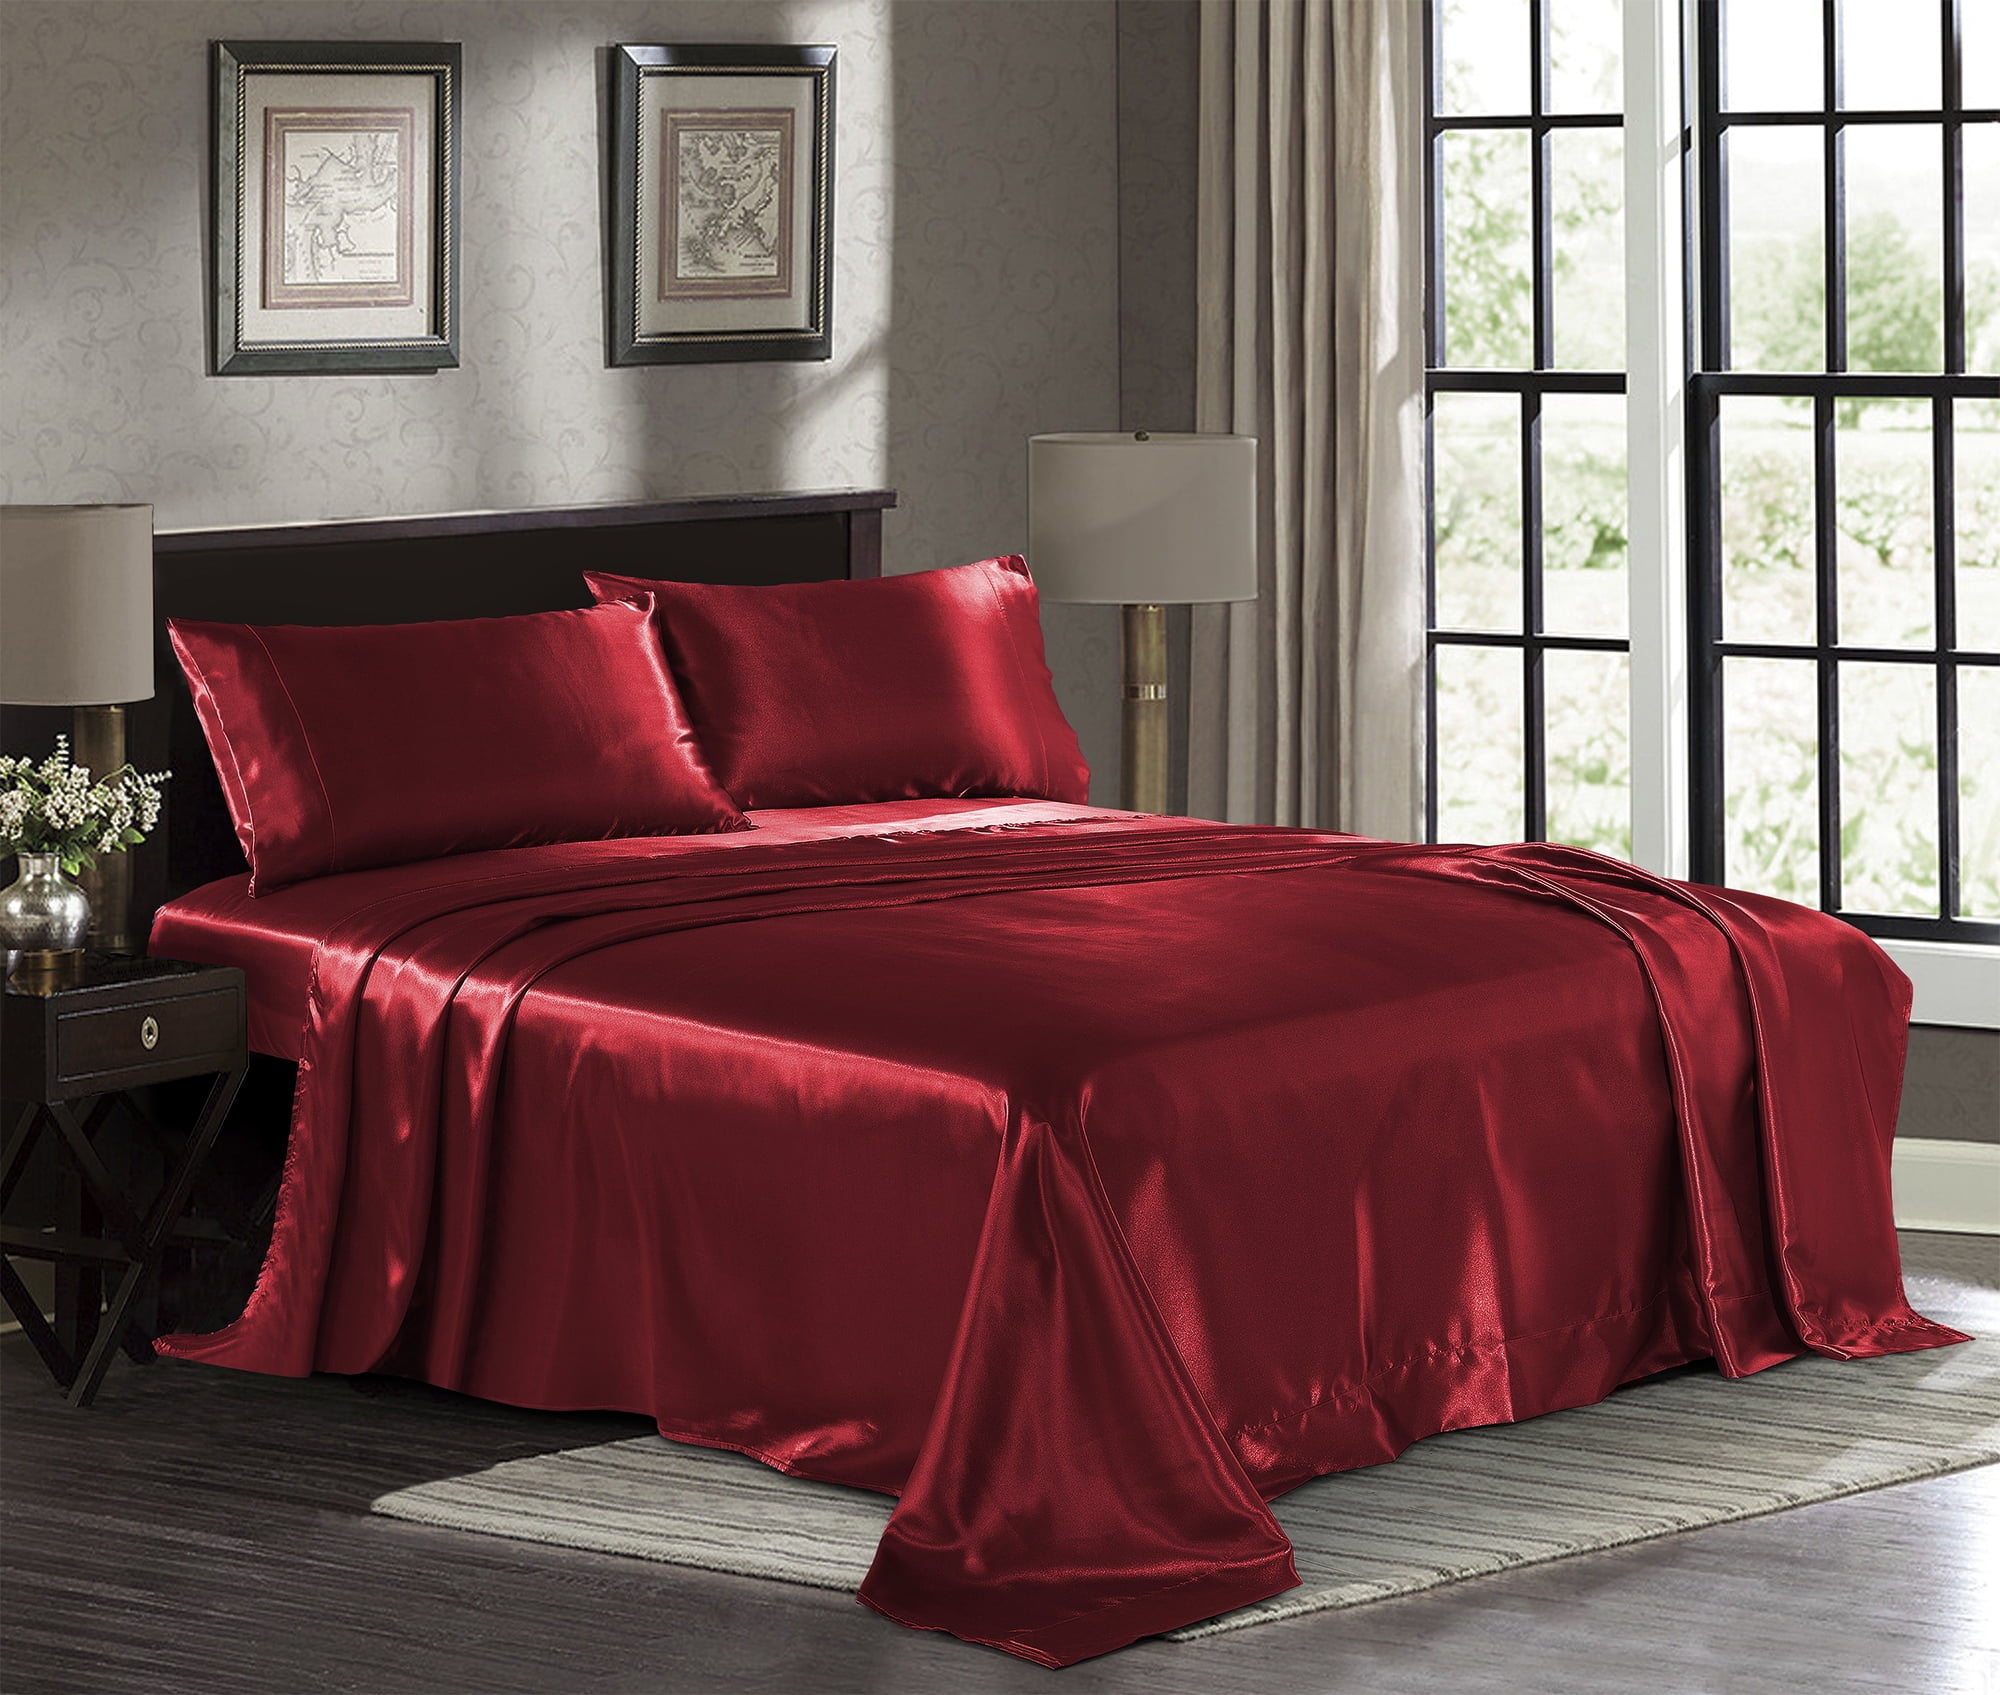 Queen Fitted Bed Sheets Satin Soft Silk Luxury Bedding Comfortable Sheet 4pc Set 